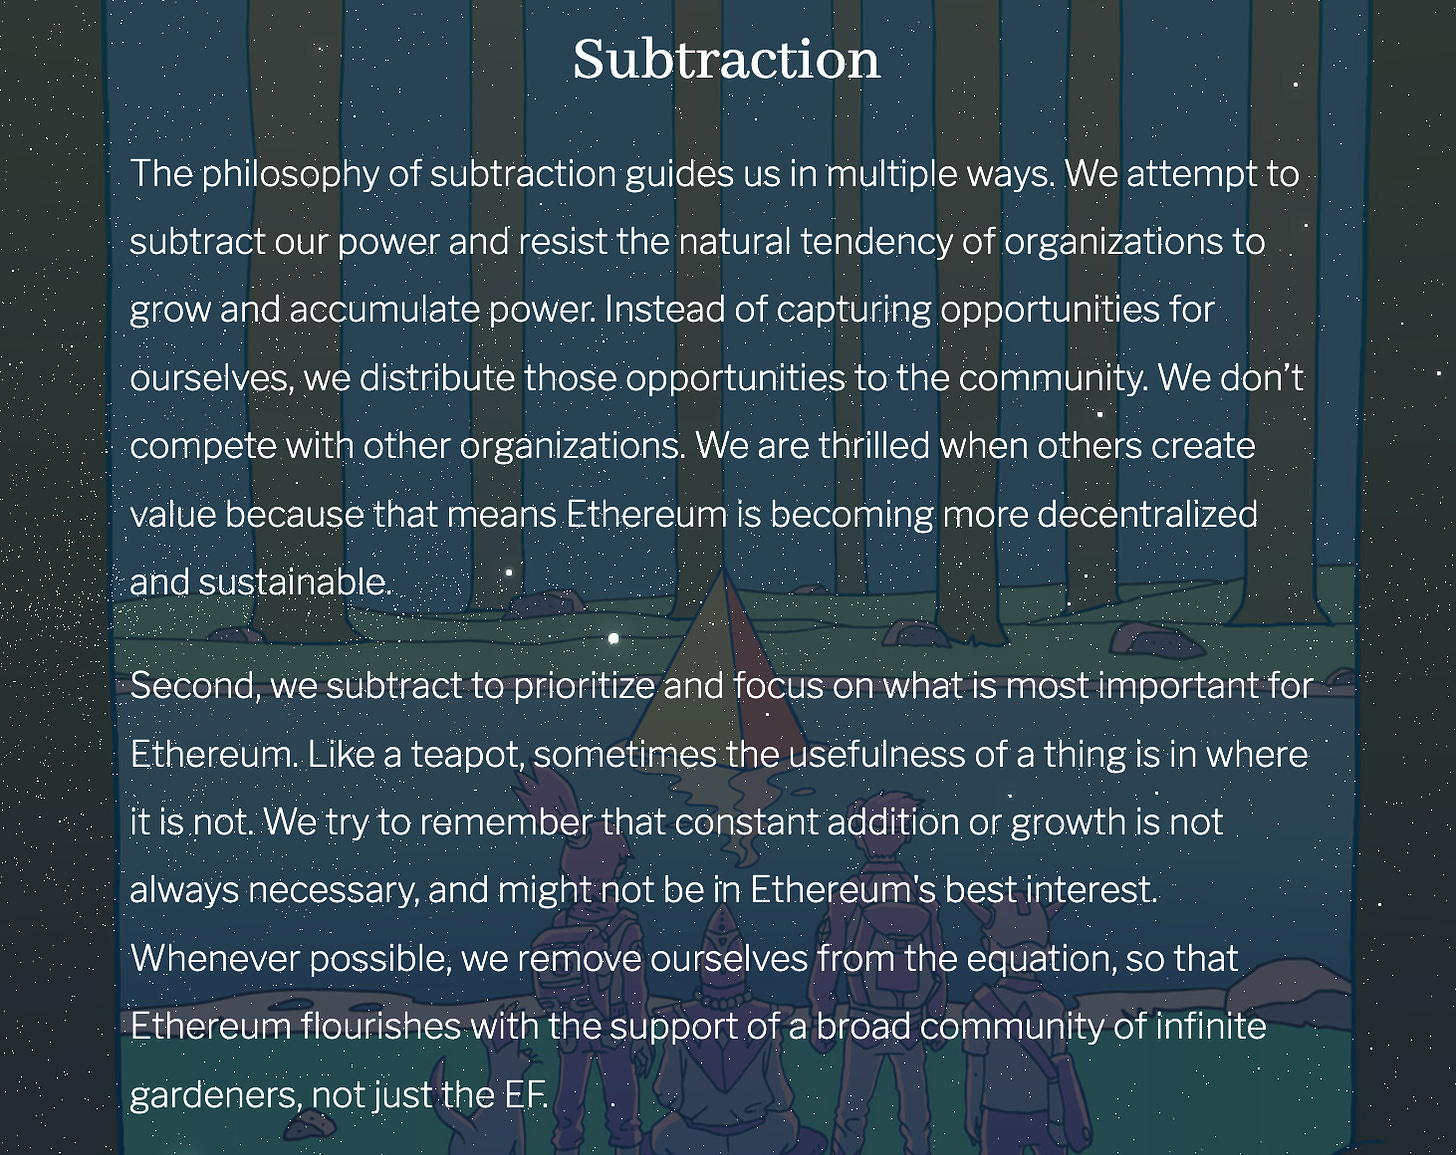 The philosophy of subtraction guides us in multiple ways. We attempt to subtract our power and resist the natural tendency of organizations to grow and accumulate power. Instead of capturing opportunities for ourselves, we distribute those opportunities to the community. We don’t compete with other organizations. We are thrilled when others create value because that means Ethereum is becoming more decentralized and sustainable. Second, we subtract to prioritize and focus on what is most important for Ethereum. Like a teapot, sometimes the usefulness of a thing is in where it is not. We try to remember that constant addition or growth is not always necessary, and might not be in Ethereum's best interest. Whenever possible, we remove ourselves from the equation, so that Ethereum flourishes with the support of a broad community of infinite gardeners, not just the EF.